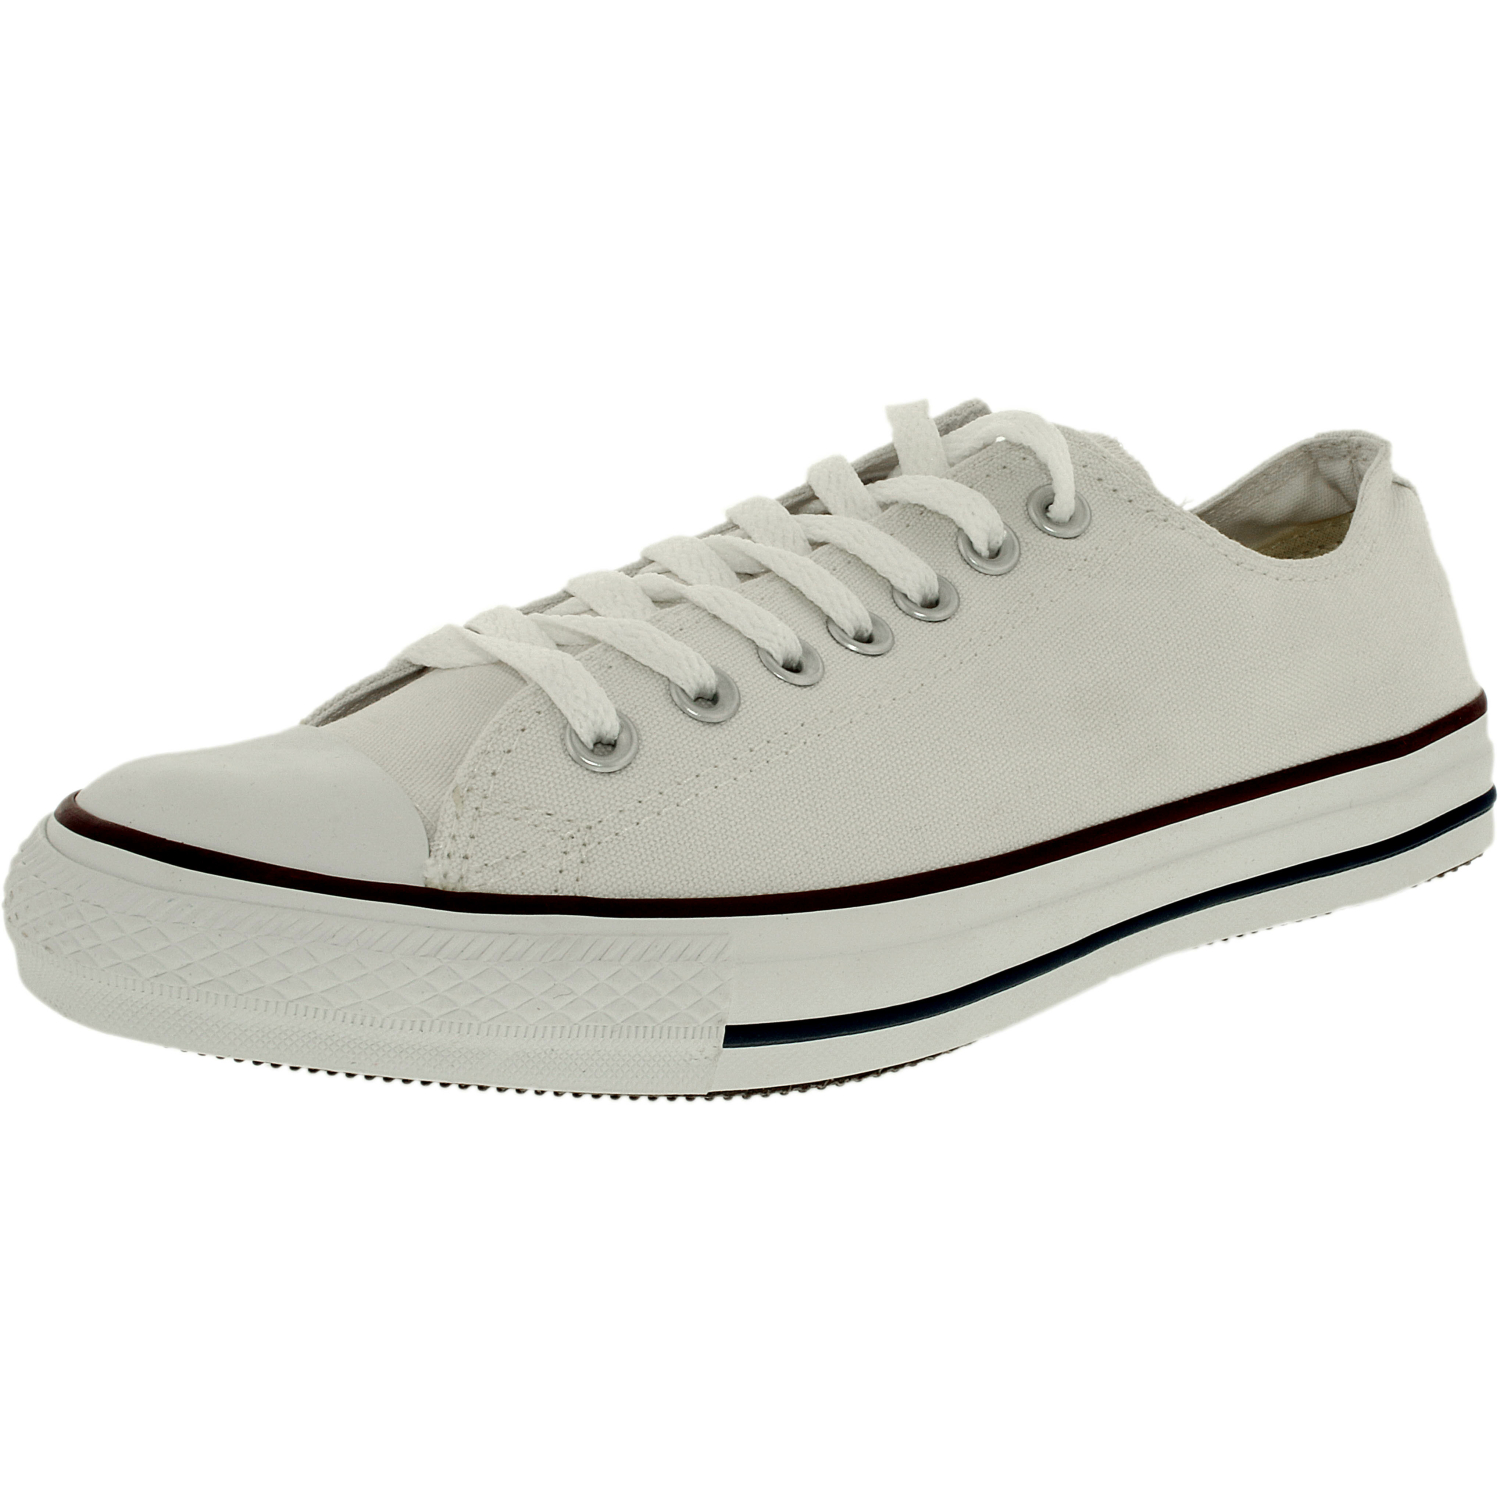 Converse Chuck Taylor All Star Core Low Top Canvas Ankle-High Rubber Fashion Sneaker